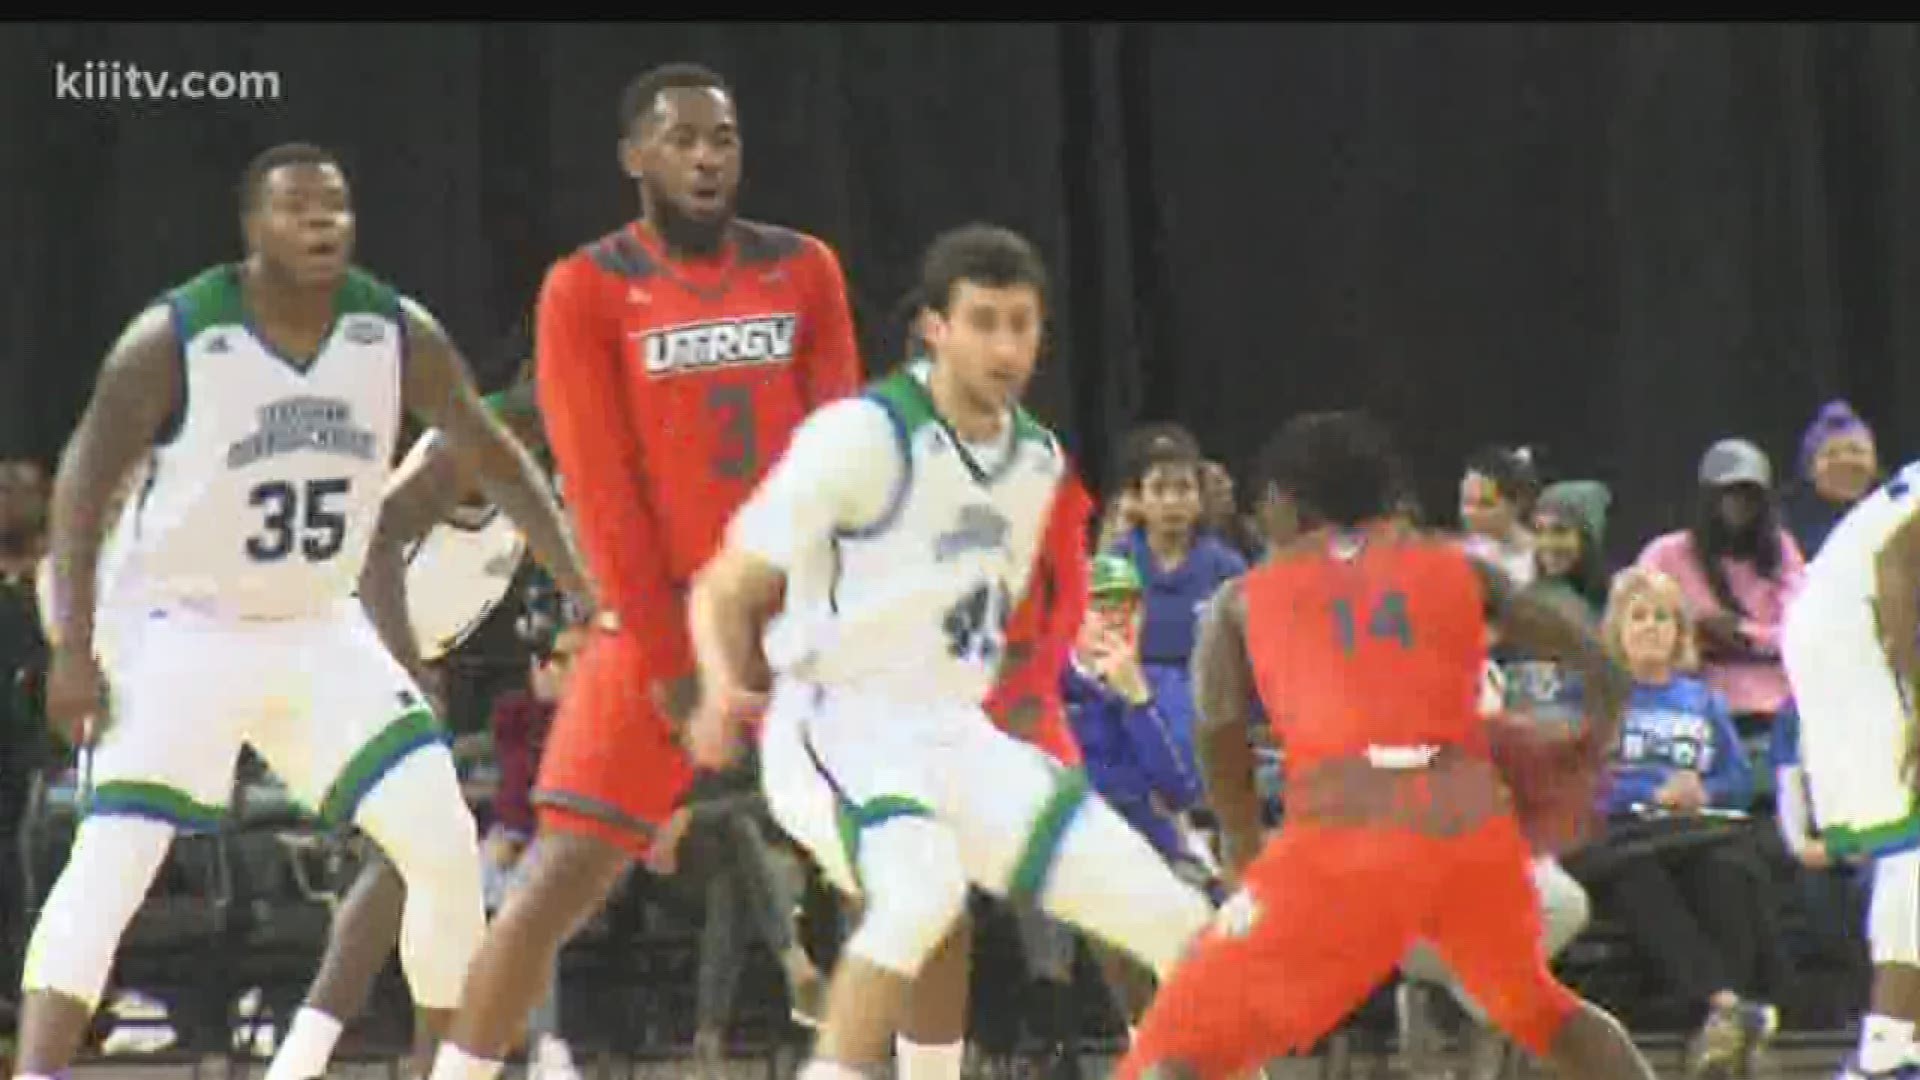 Texas A&M-Corpus Christi Men's basketball picked up it's first loss of the season against UTRGV 76-69.